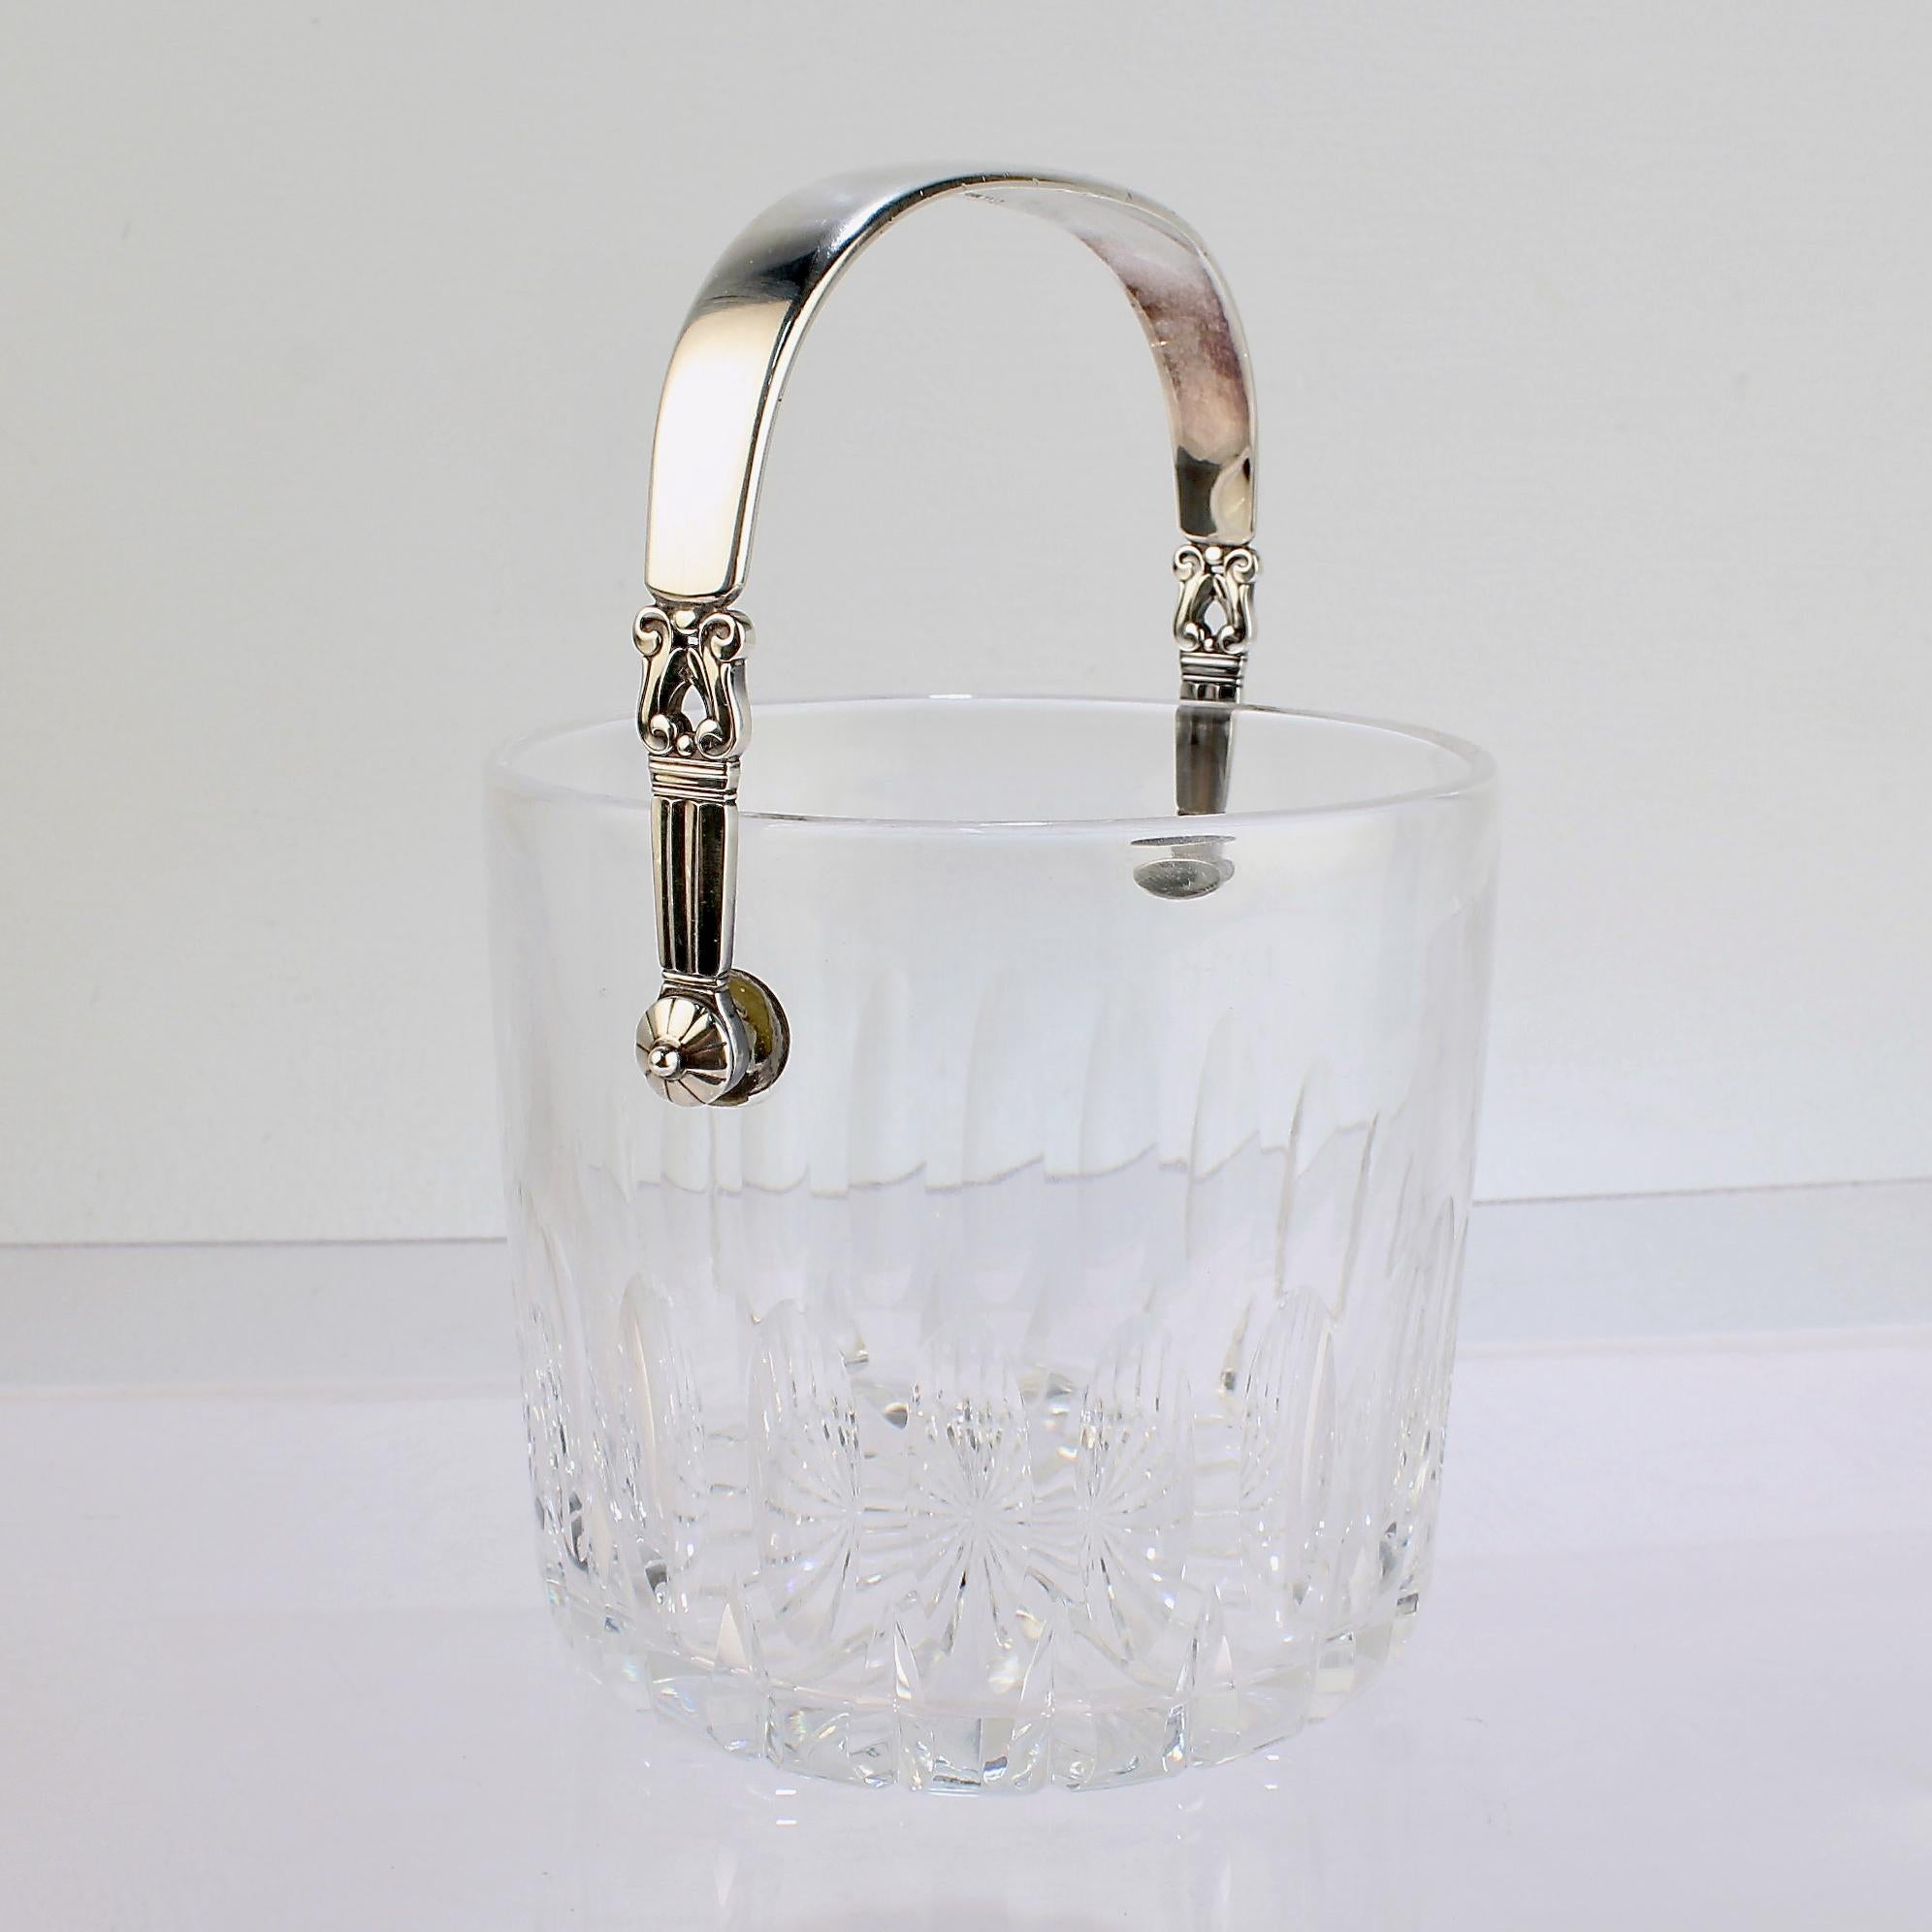 A fine Acorn pattern sterling silver and cut glass ice bucket.

Designed by Johan Rohde for Georg Jensen.

Model no. 1137.

Simply a wonderful cocktail or bar accessory!

Date:
20th Century

Overall Condition:
It is in overall good, as-pictured,